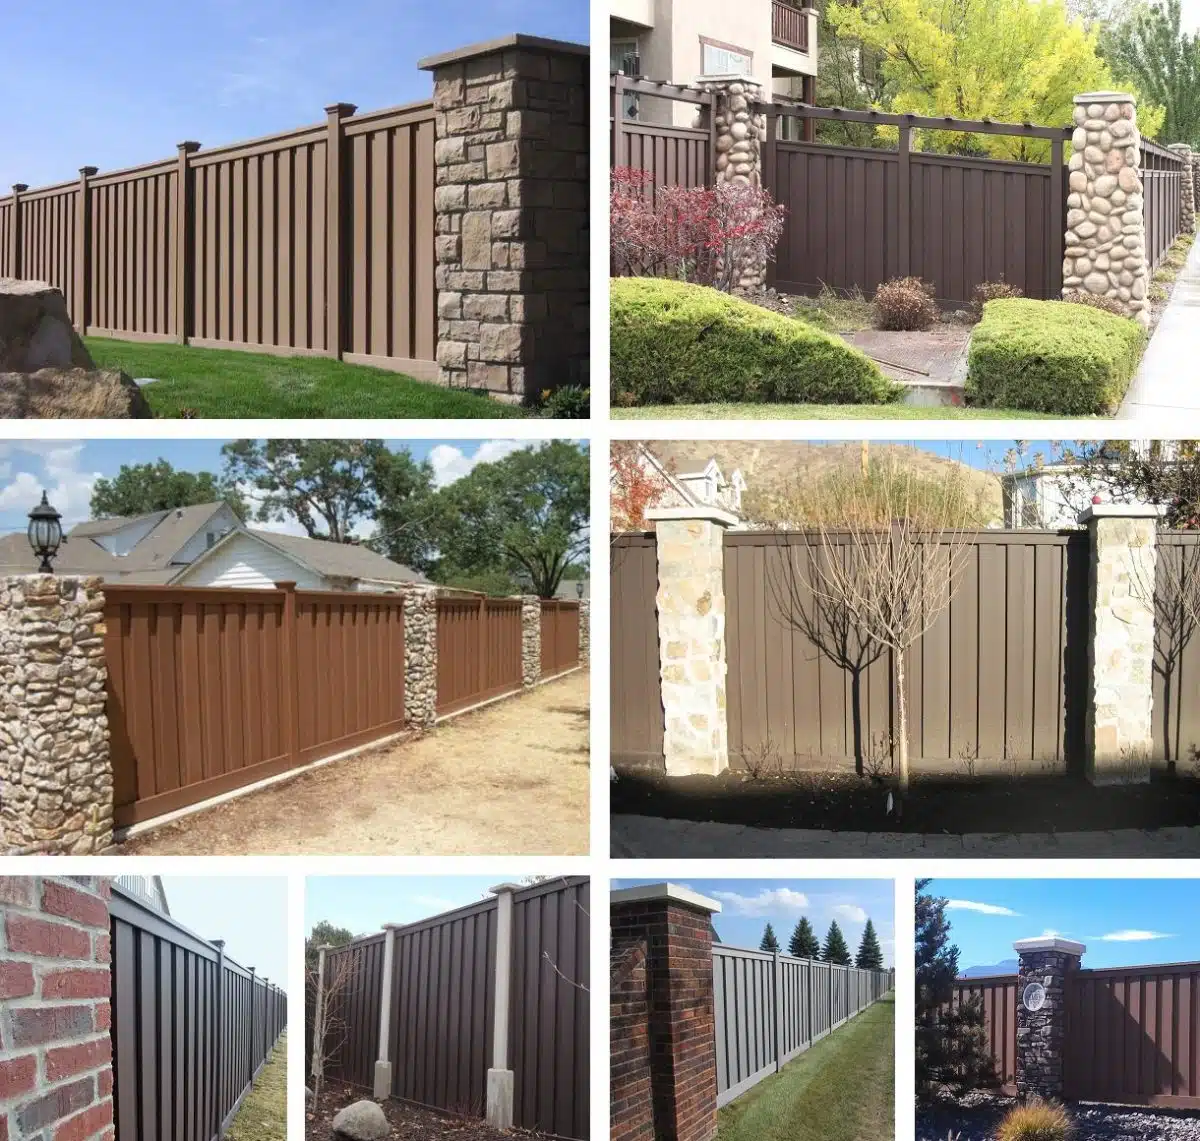 A collage of Trex Fences built between stone colums and brick pillars.